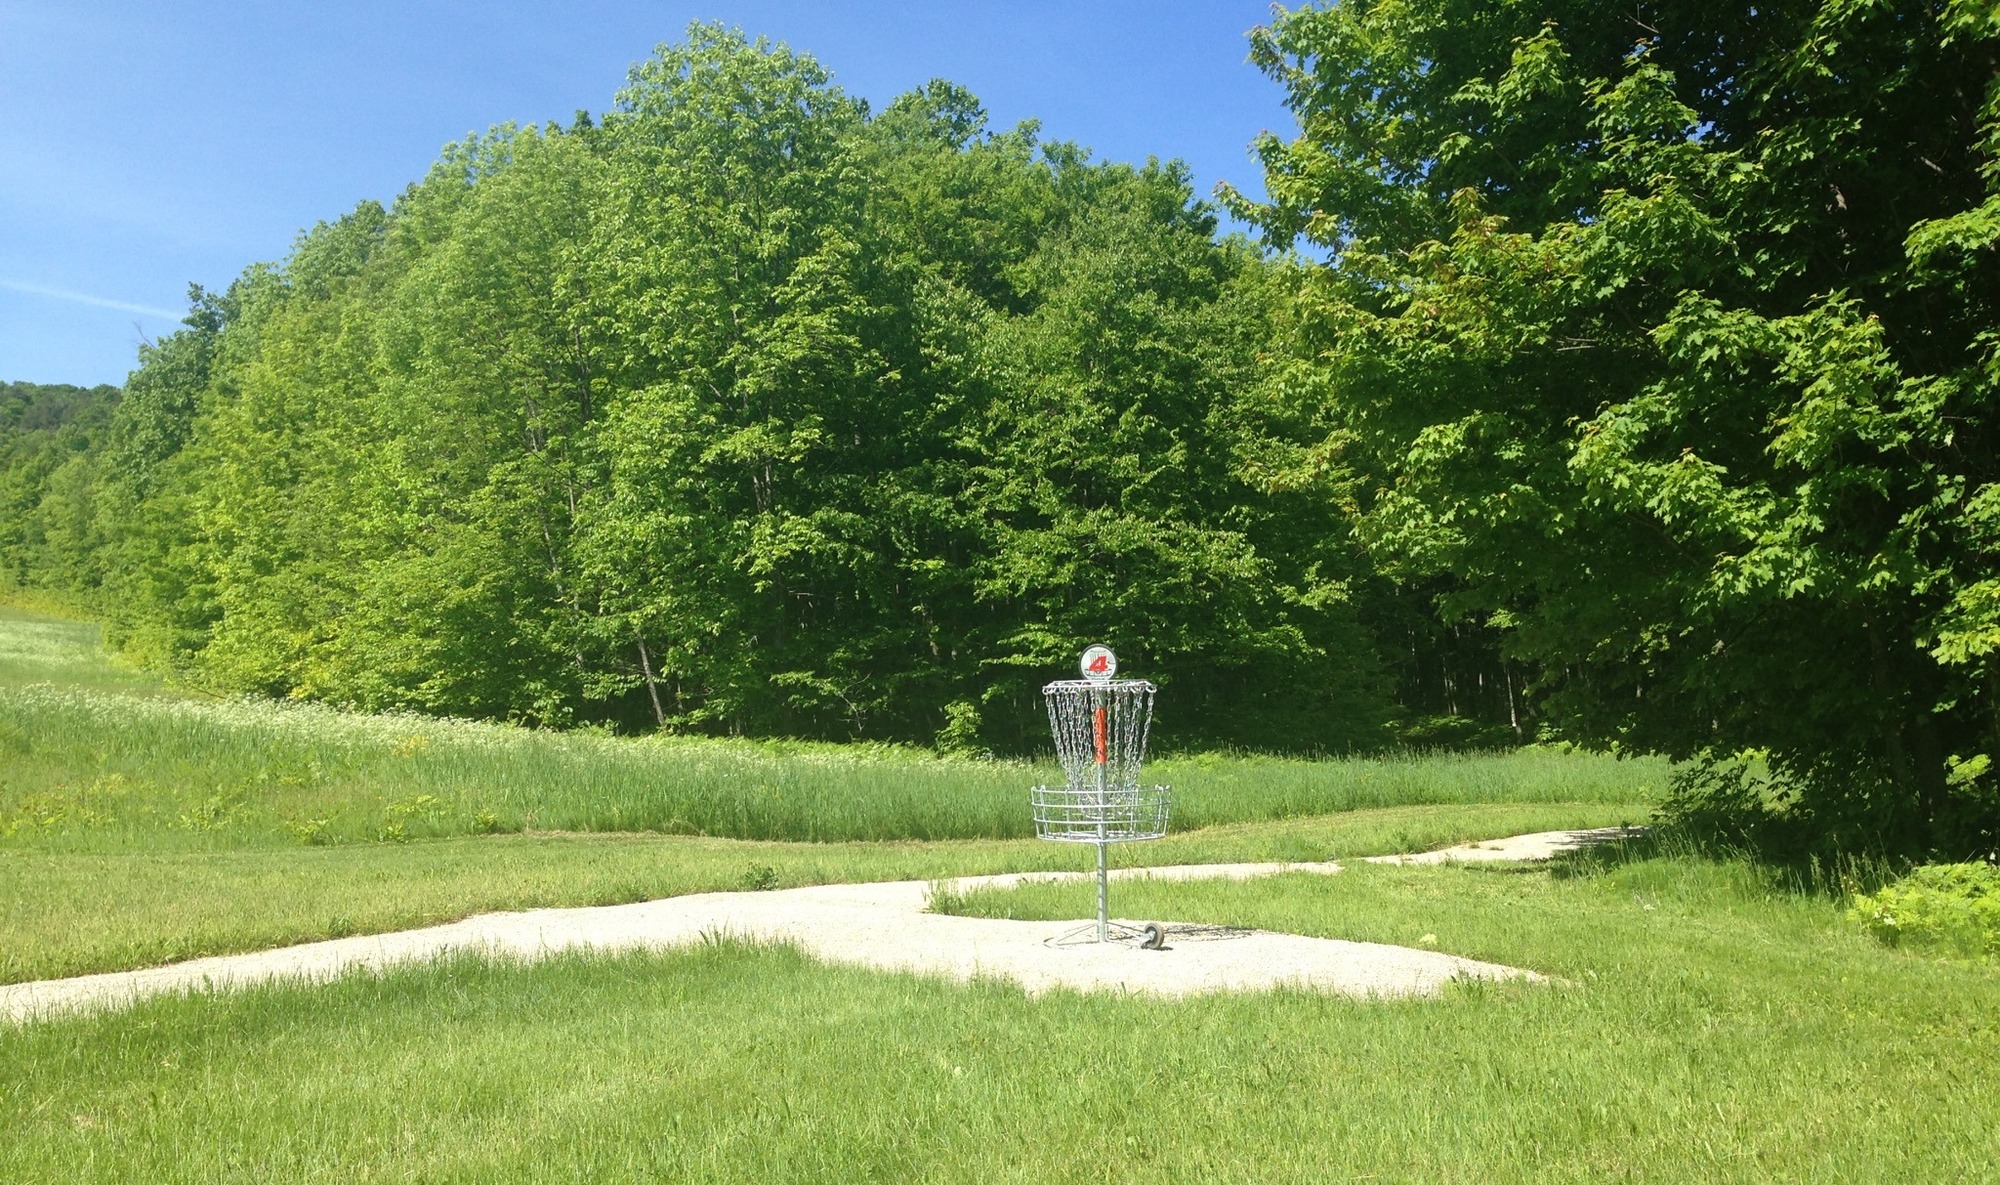 A target on the scenic disc golf course at Porcupine Mountains Wilderness State Park in the western Upper Peninsula.